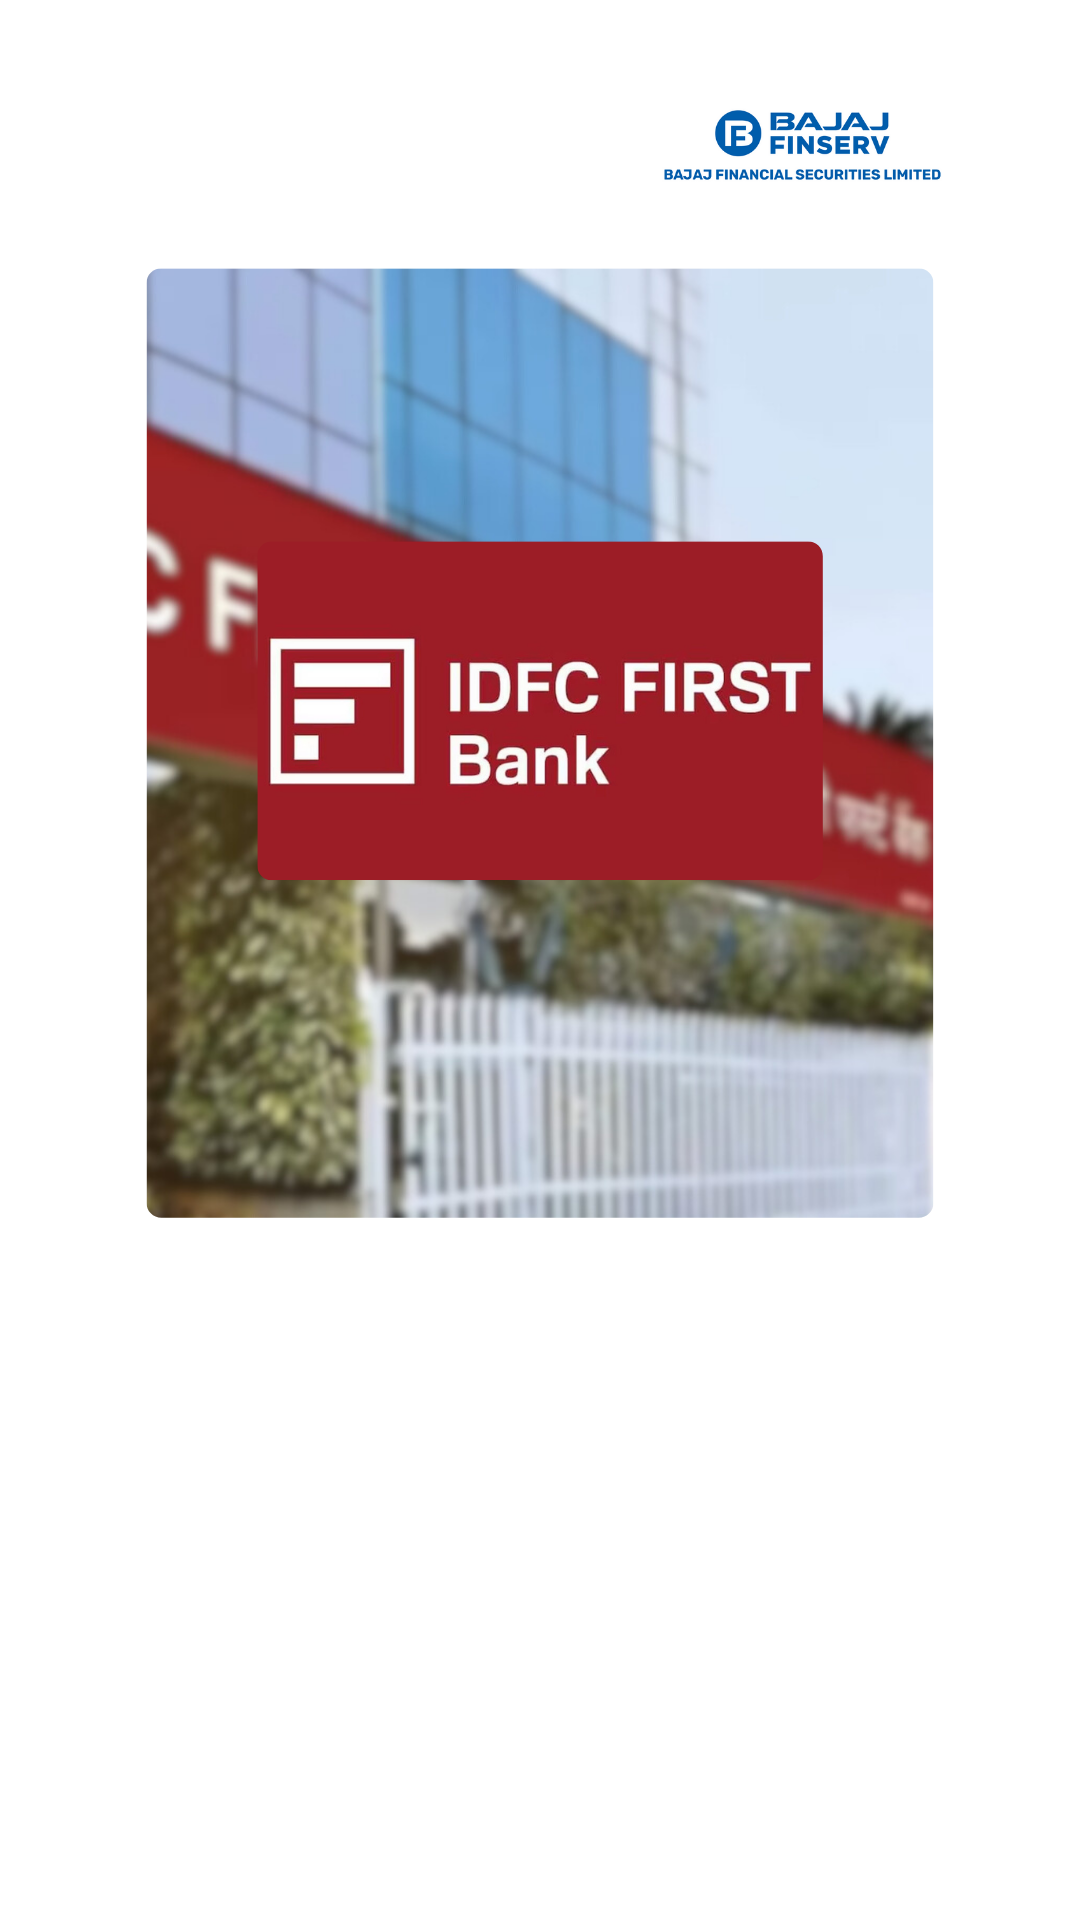 IDFC First Bank and IDFC merger: What does it mean for investors? - The  Hindu BusinessLine